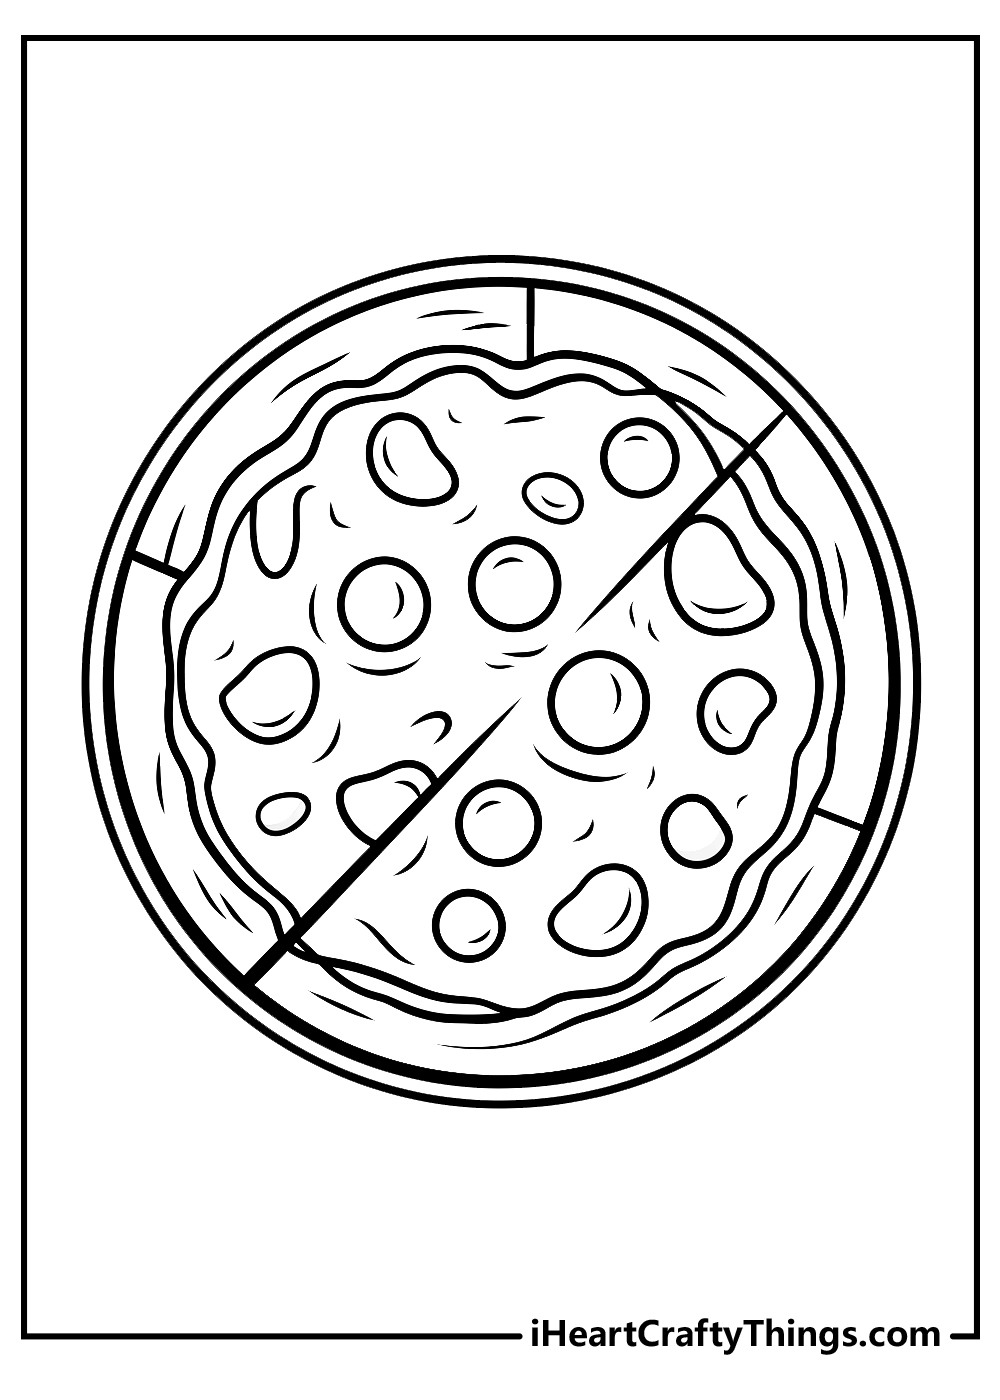 Pizza coloring pages updated